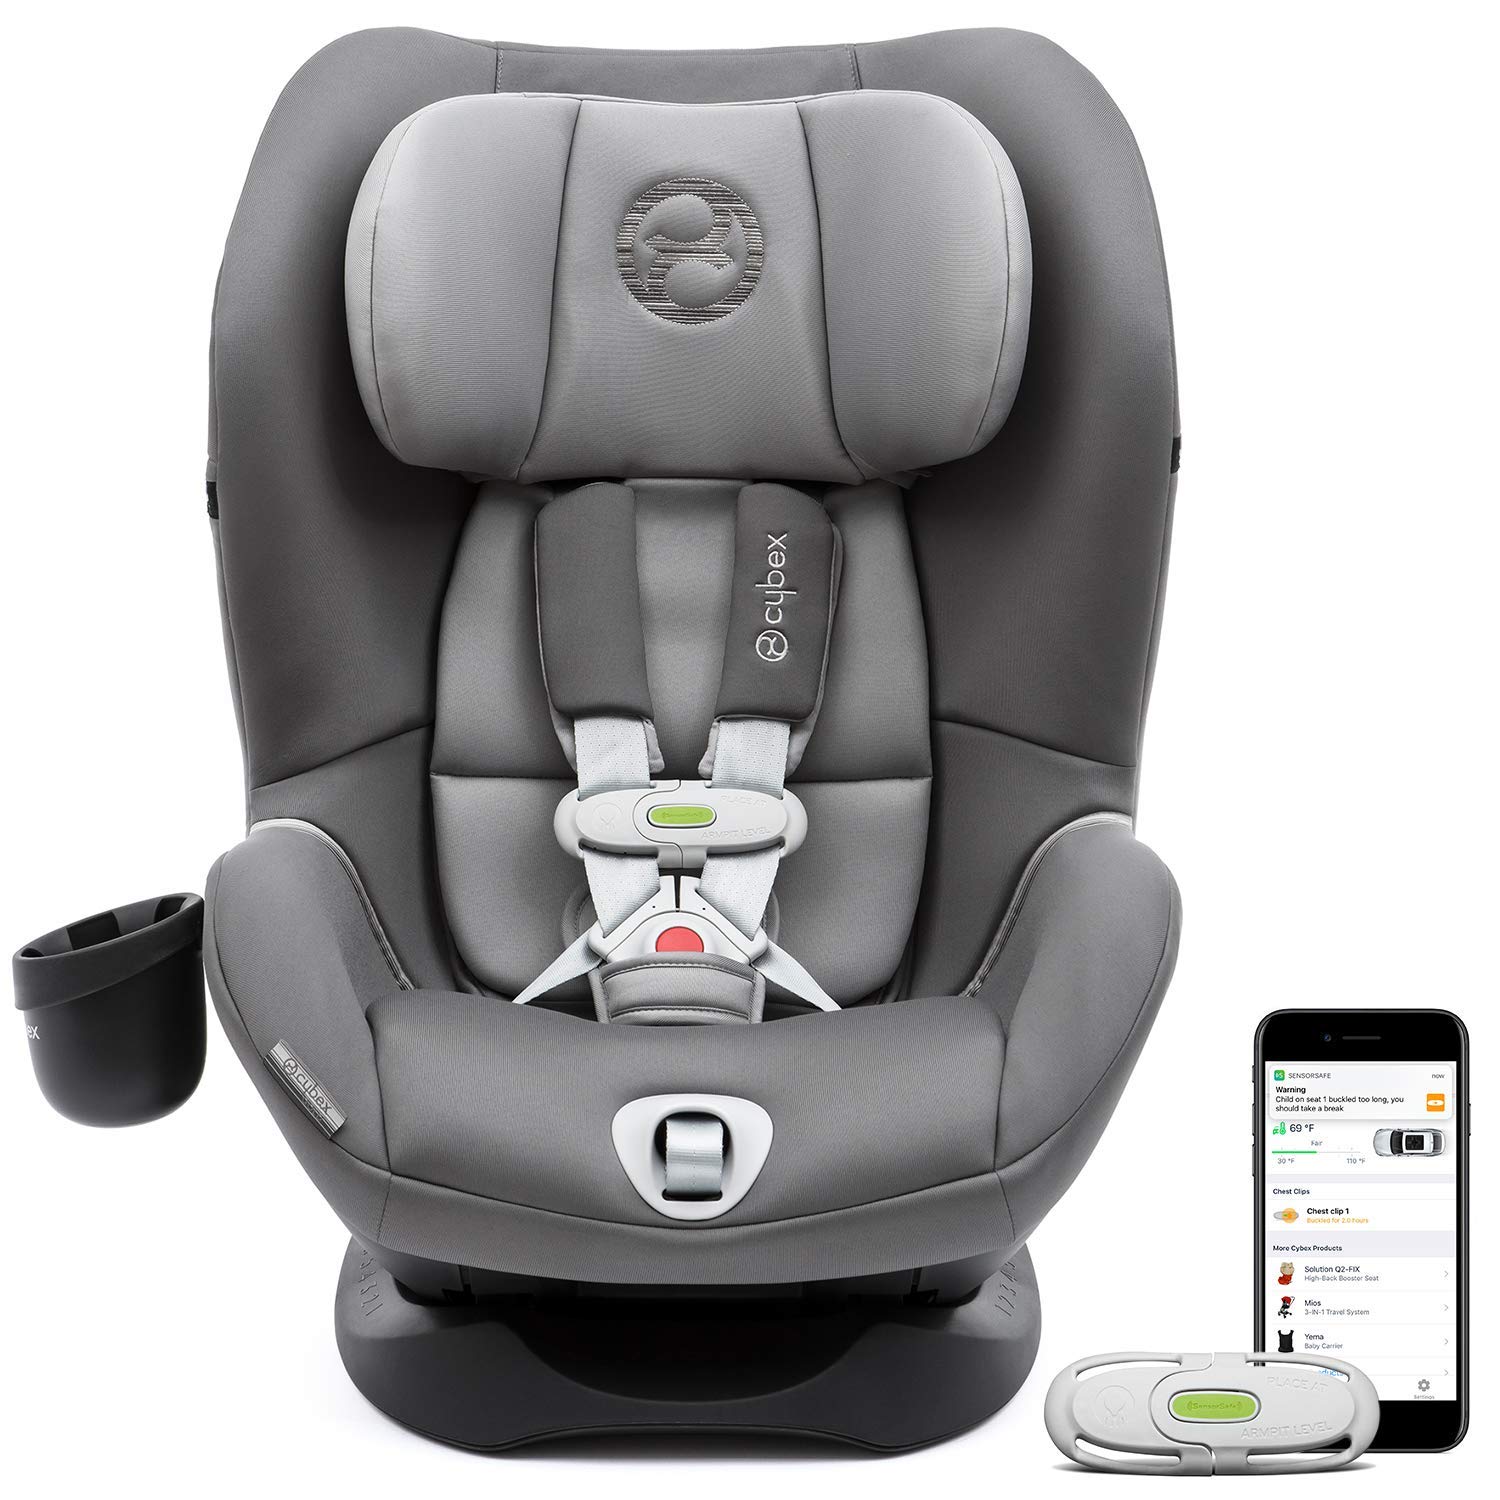 Stay Connected: Car Seats with Integrated Tech Features for Peace of Mind